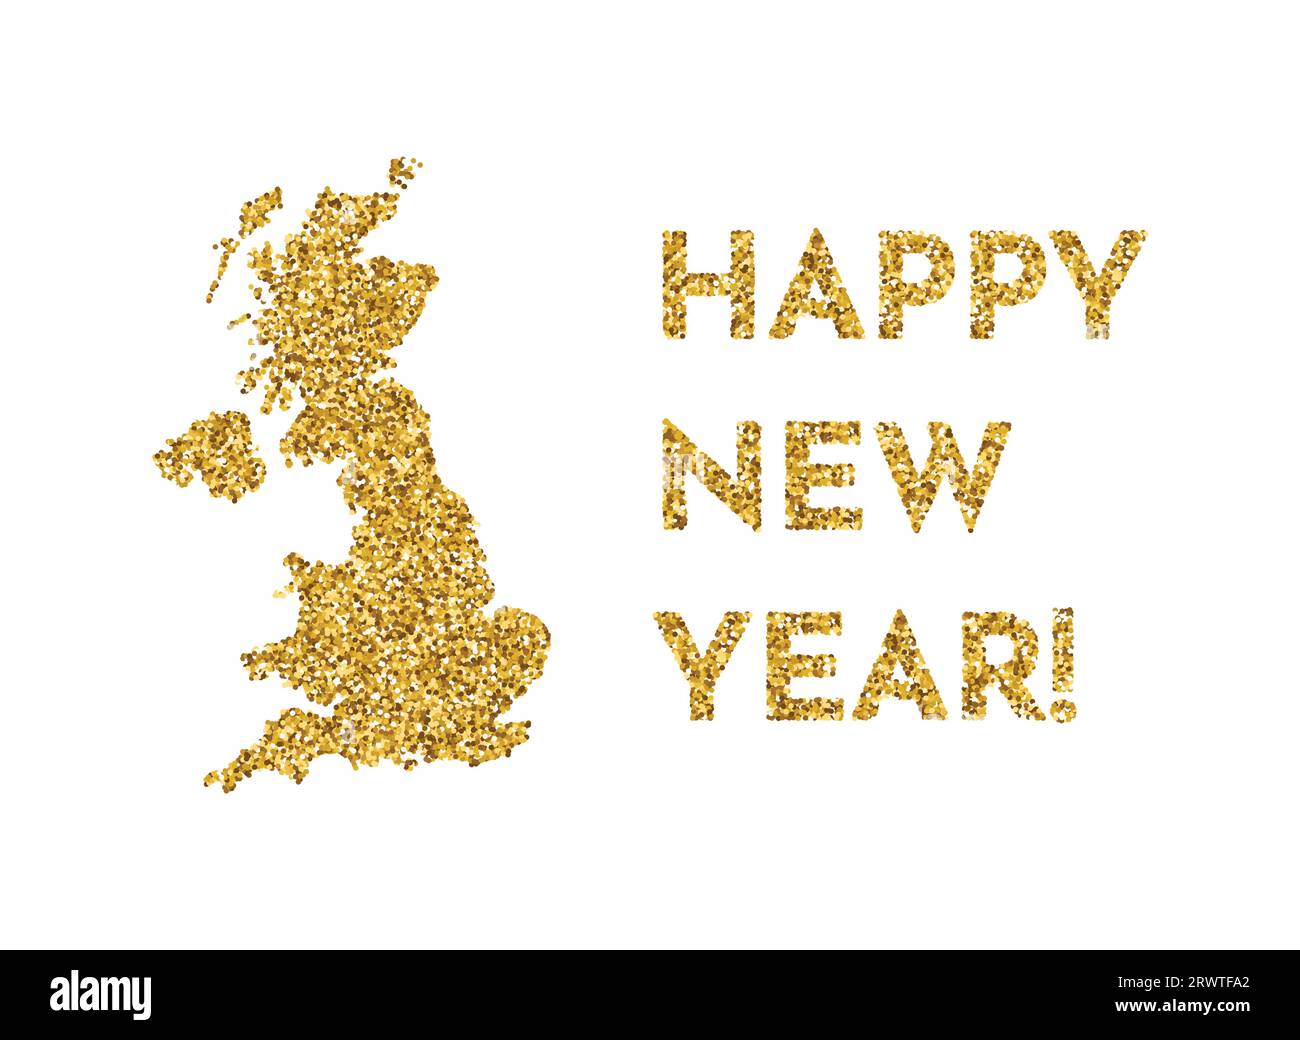 Vector isolated illustration with simplified United Kingdom of Great Britain and Northern Ireland map. Shiny gold glitter texture. New Year decoration Stock Vector